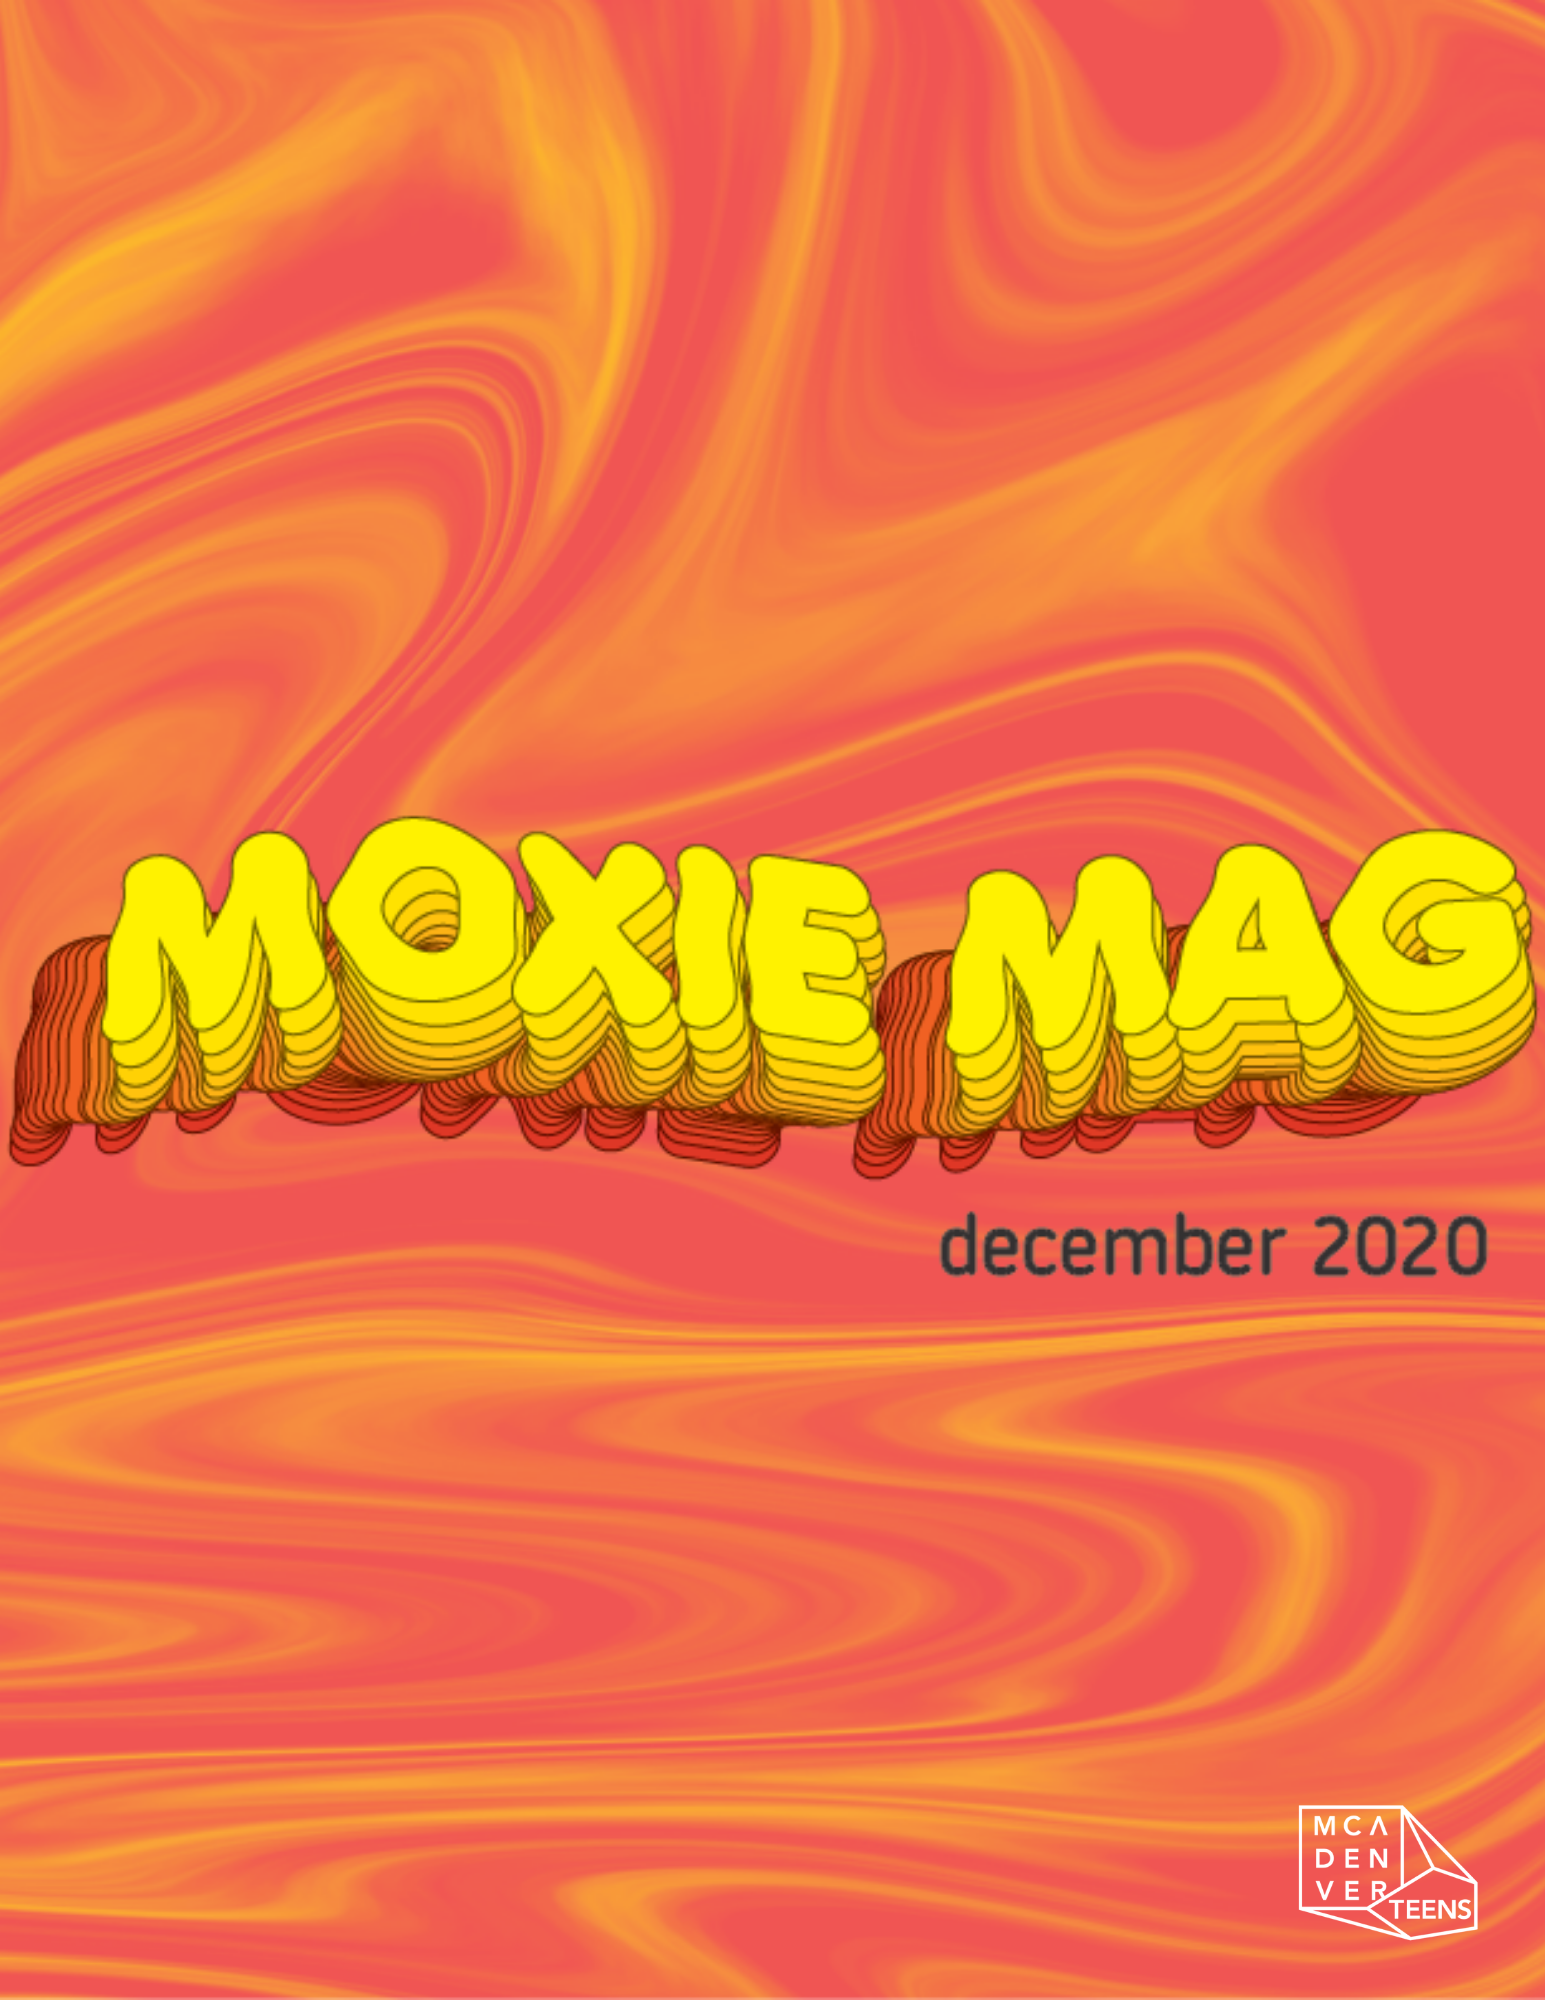 The cover of the December issue of MCA Denver Teen’s MoxieMag. The cover has a psychedelic vibe to it, with swirls of orange, yellow, and red. The text on the cover reads “Moxie Mag” in exaggerated, bright yellow font.  The white geometric MCA Denver teen logo is placed on the bottom right corner of the page.